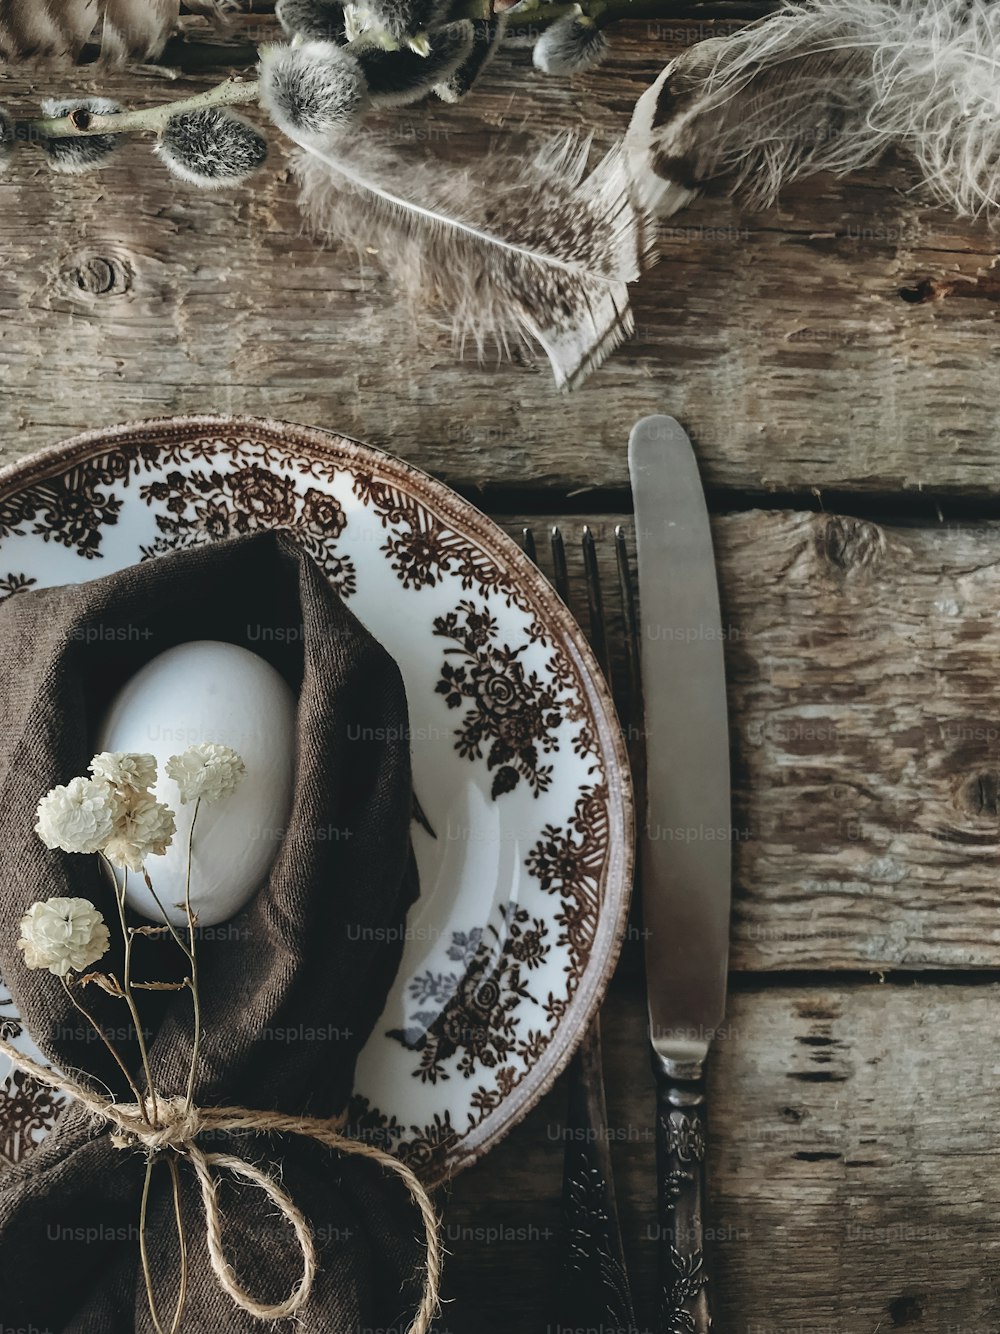 Stylish rustic Easter table setting. Natural easter egg in napkin with flowers, vintage plate and cutlery, soft feathers on aged wooden table. Rural Easter still life. Happy Easter